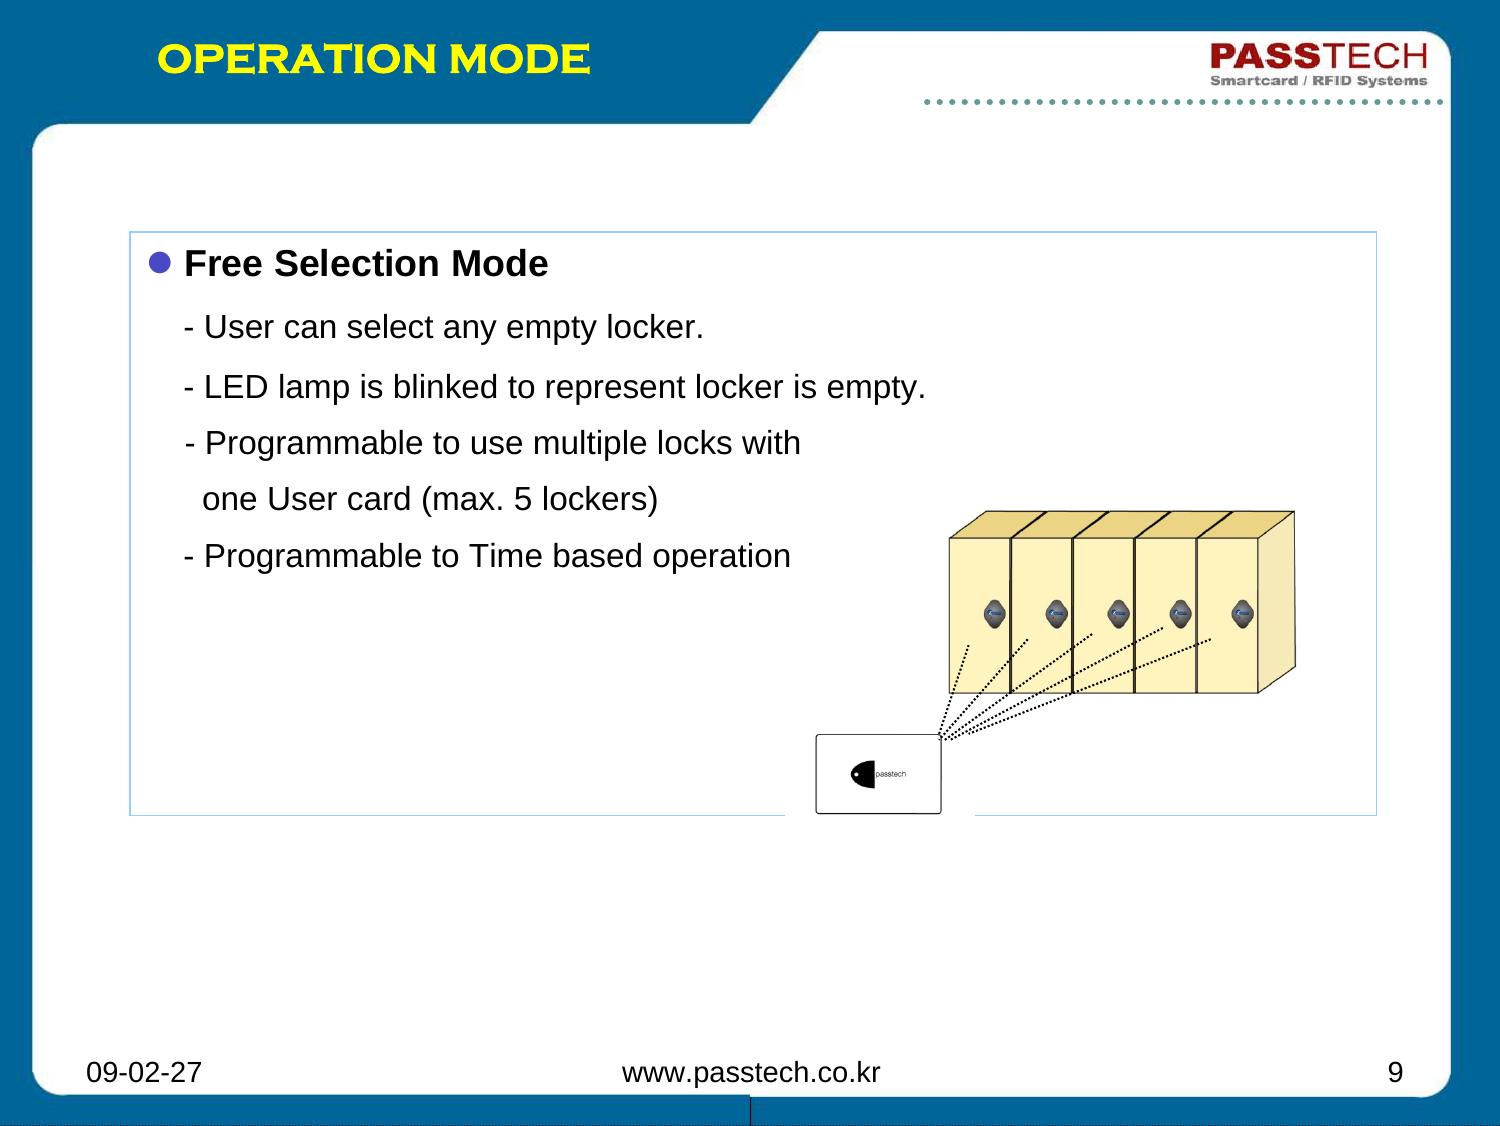 09-02-27 www.passtech.co.kr 9OPERATION MODEzFree Selection Mode - User can select any empty locker.- LED lamp is blinked to represent locker is empty.- Programmable to use multiple locks with one User card (max. 5 lockers)- Programmable to Time based operation 